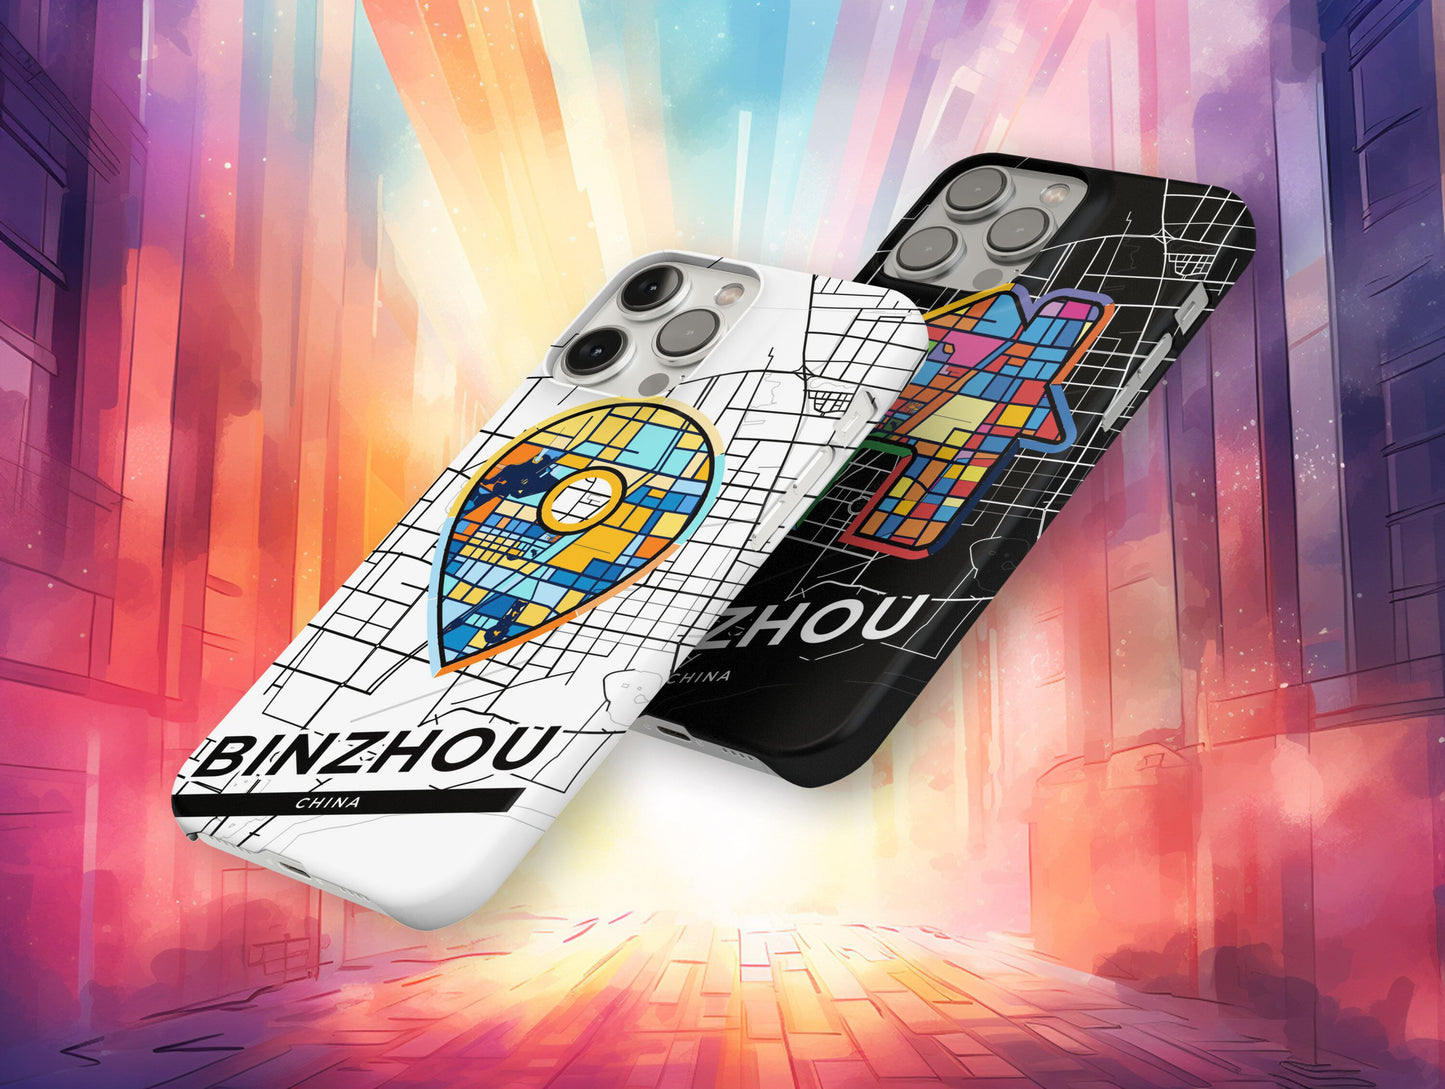 Binzhou China slim phone case with colorful icon. Birthday, wedding or housewarming gift. Couple match cases.